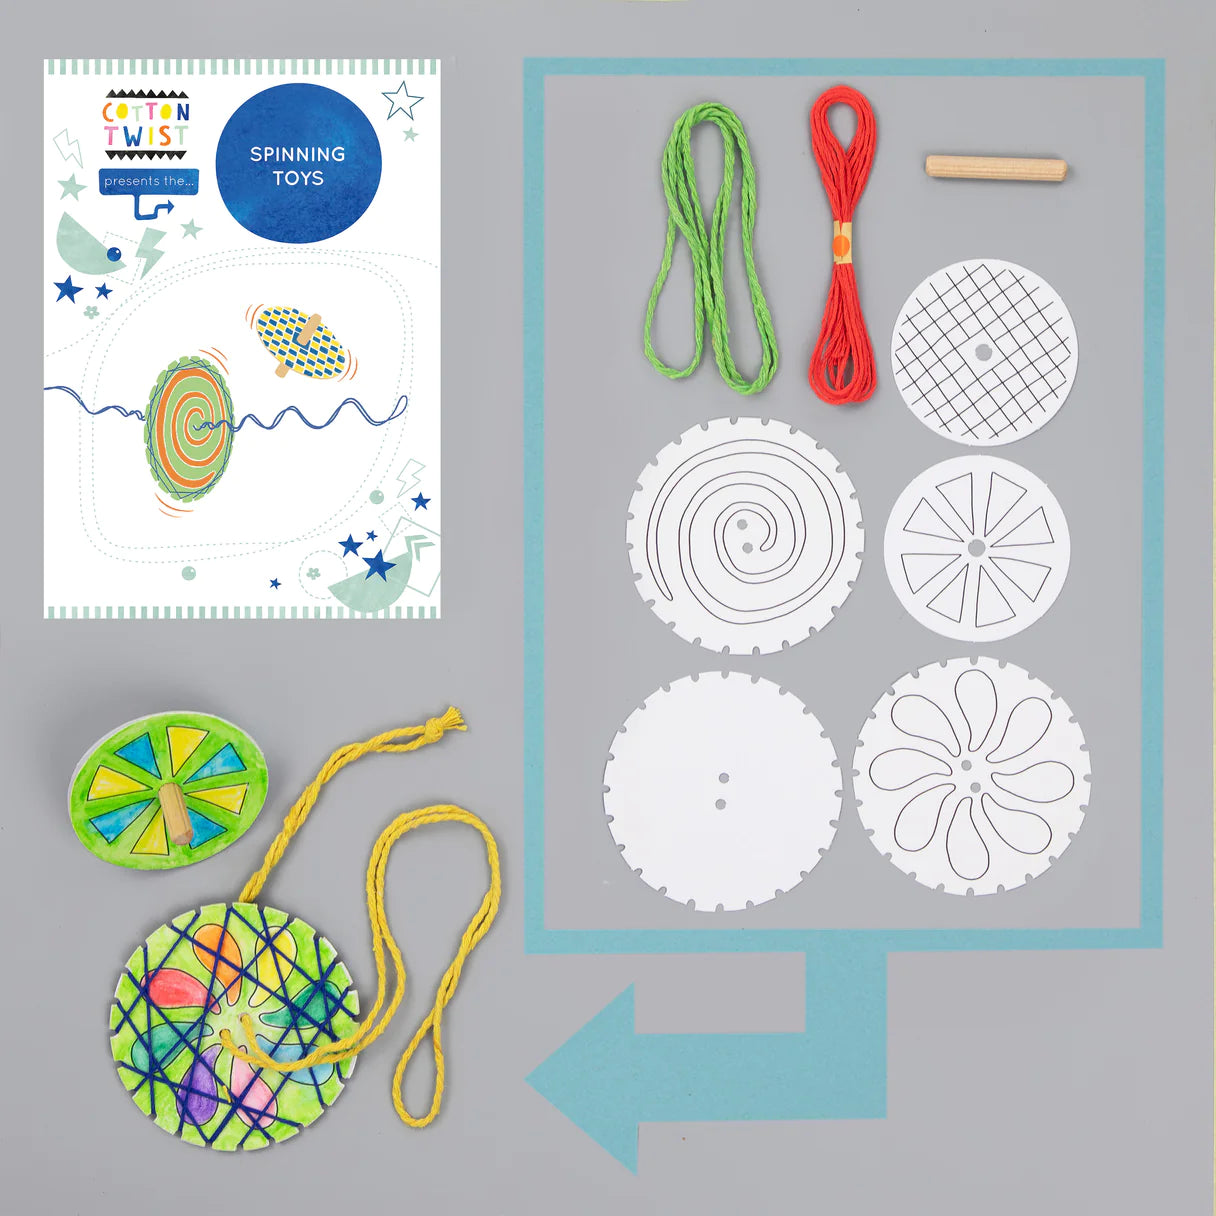 Cotton Twist Make Your Own - Spinning Toys Kit - Little Reef and Friends